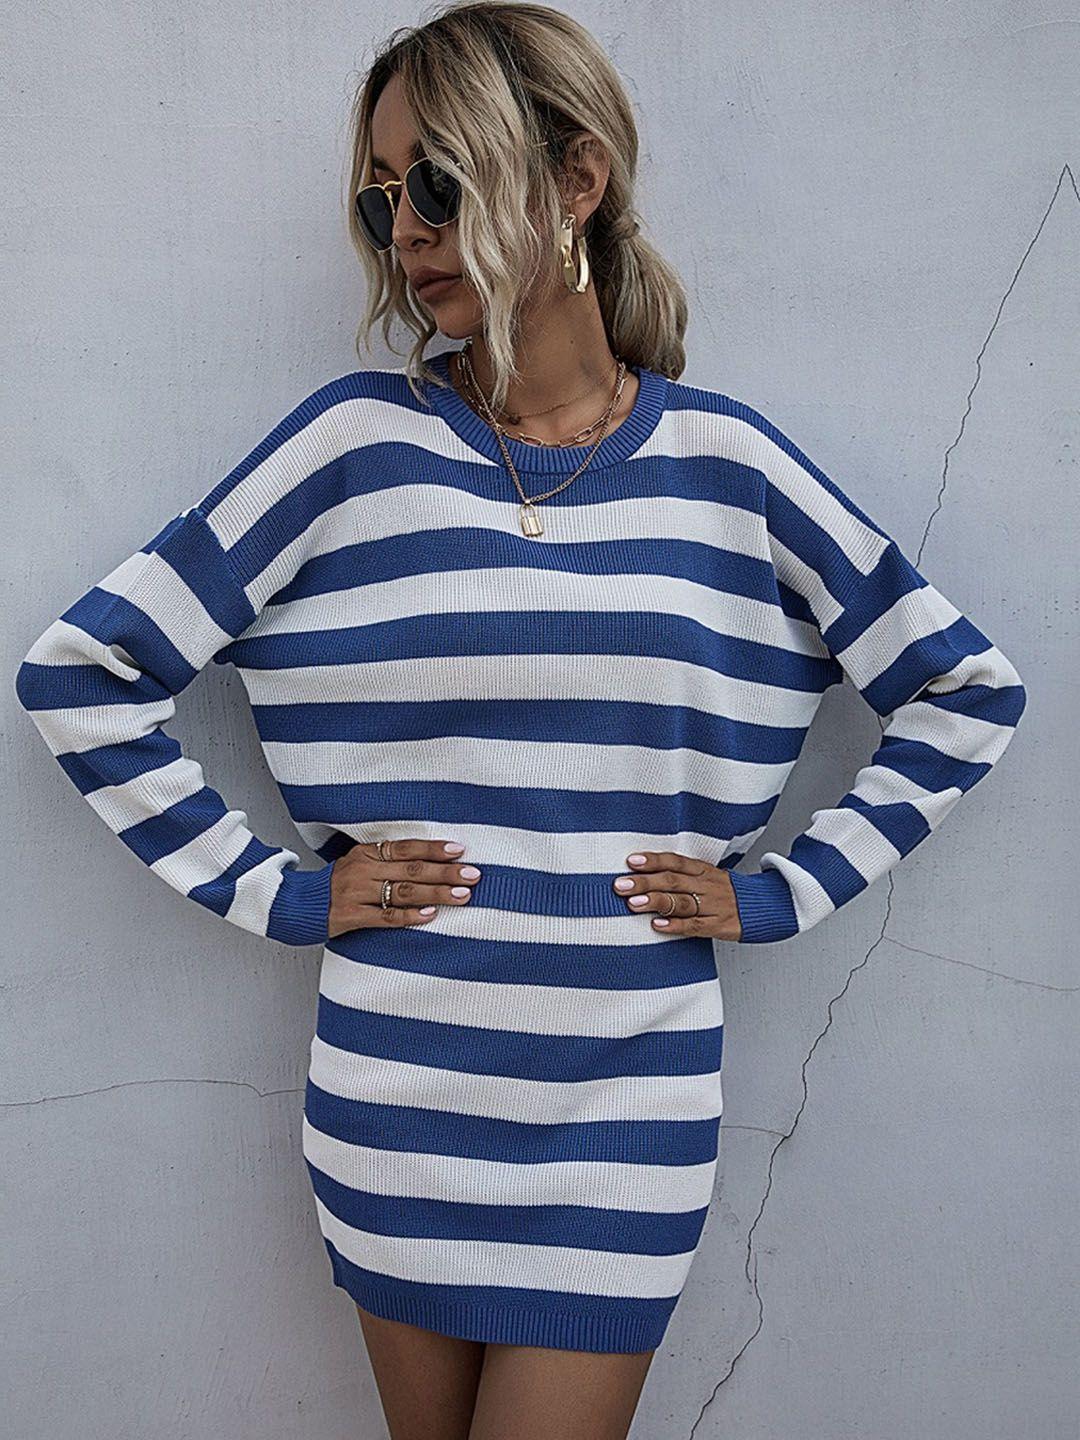 stylecast striped sweatshirt with striped mini skirt co-ords